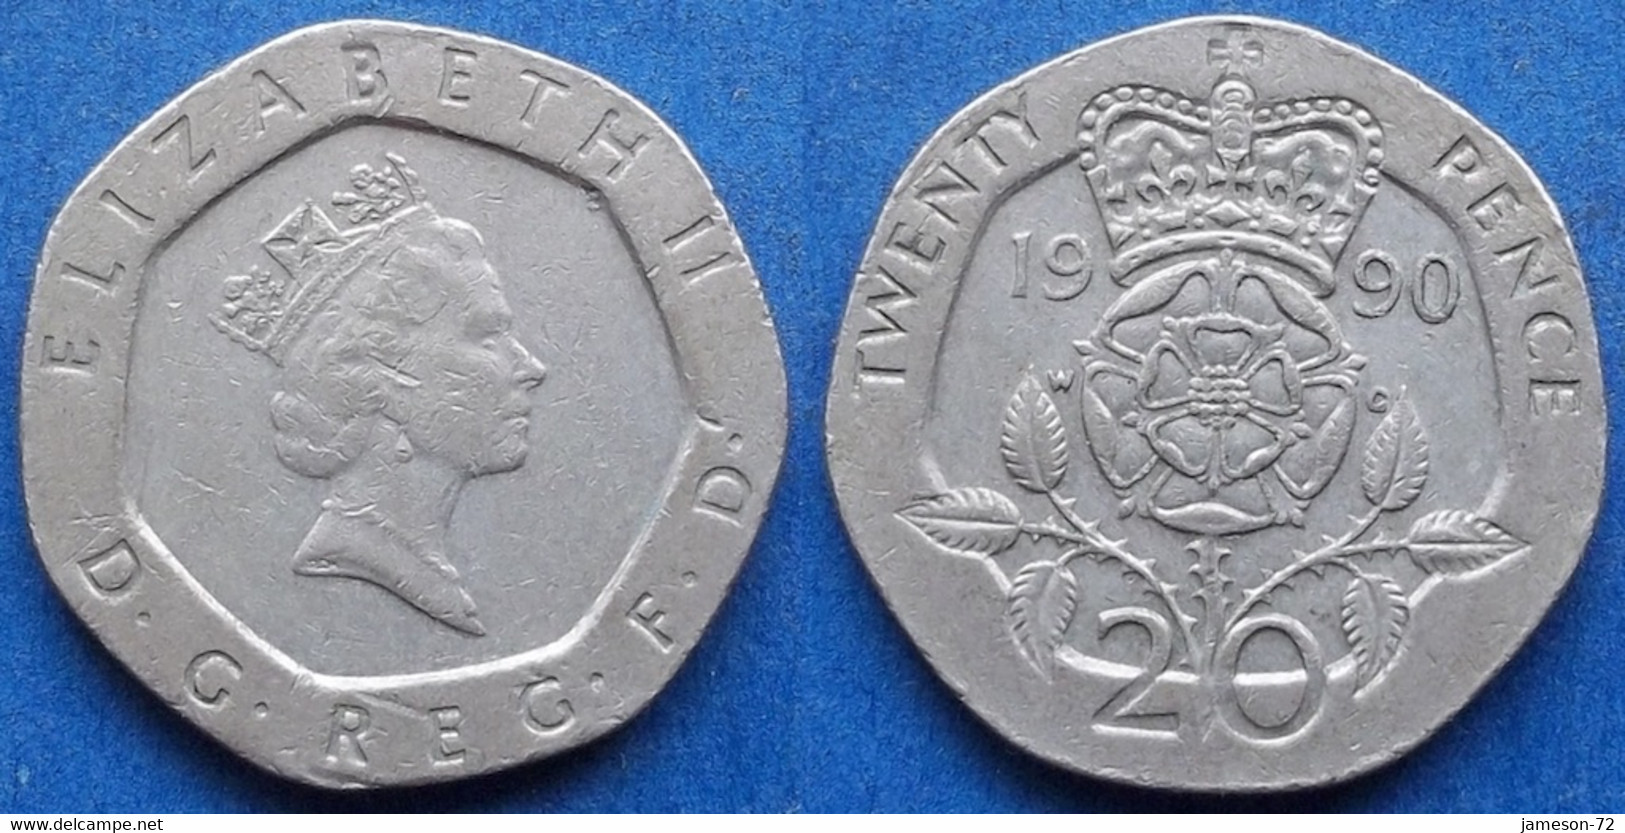 UK - 20 Pence 1990 "Crowned Rose" KM# 939 Elizabeth II Decimal Coinage (1971-2022) - Edelweiss Coins - 20 Pence